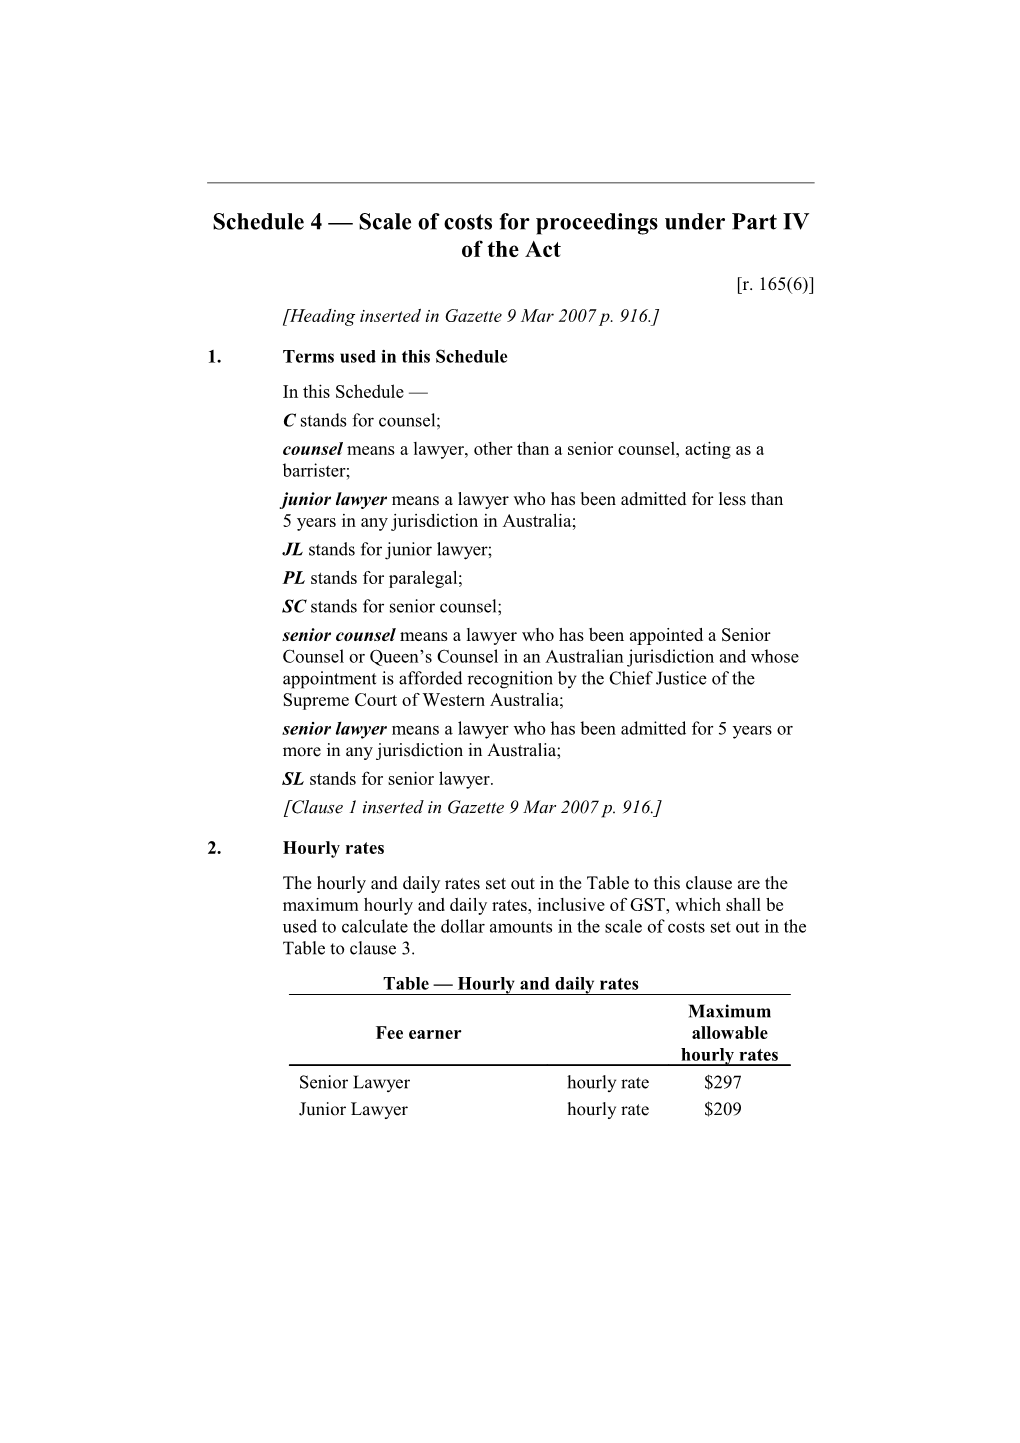 Schedule4 Scale of Costs for Proceedings Under Part IV of the Act